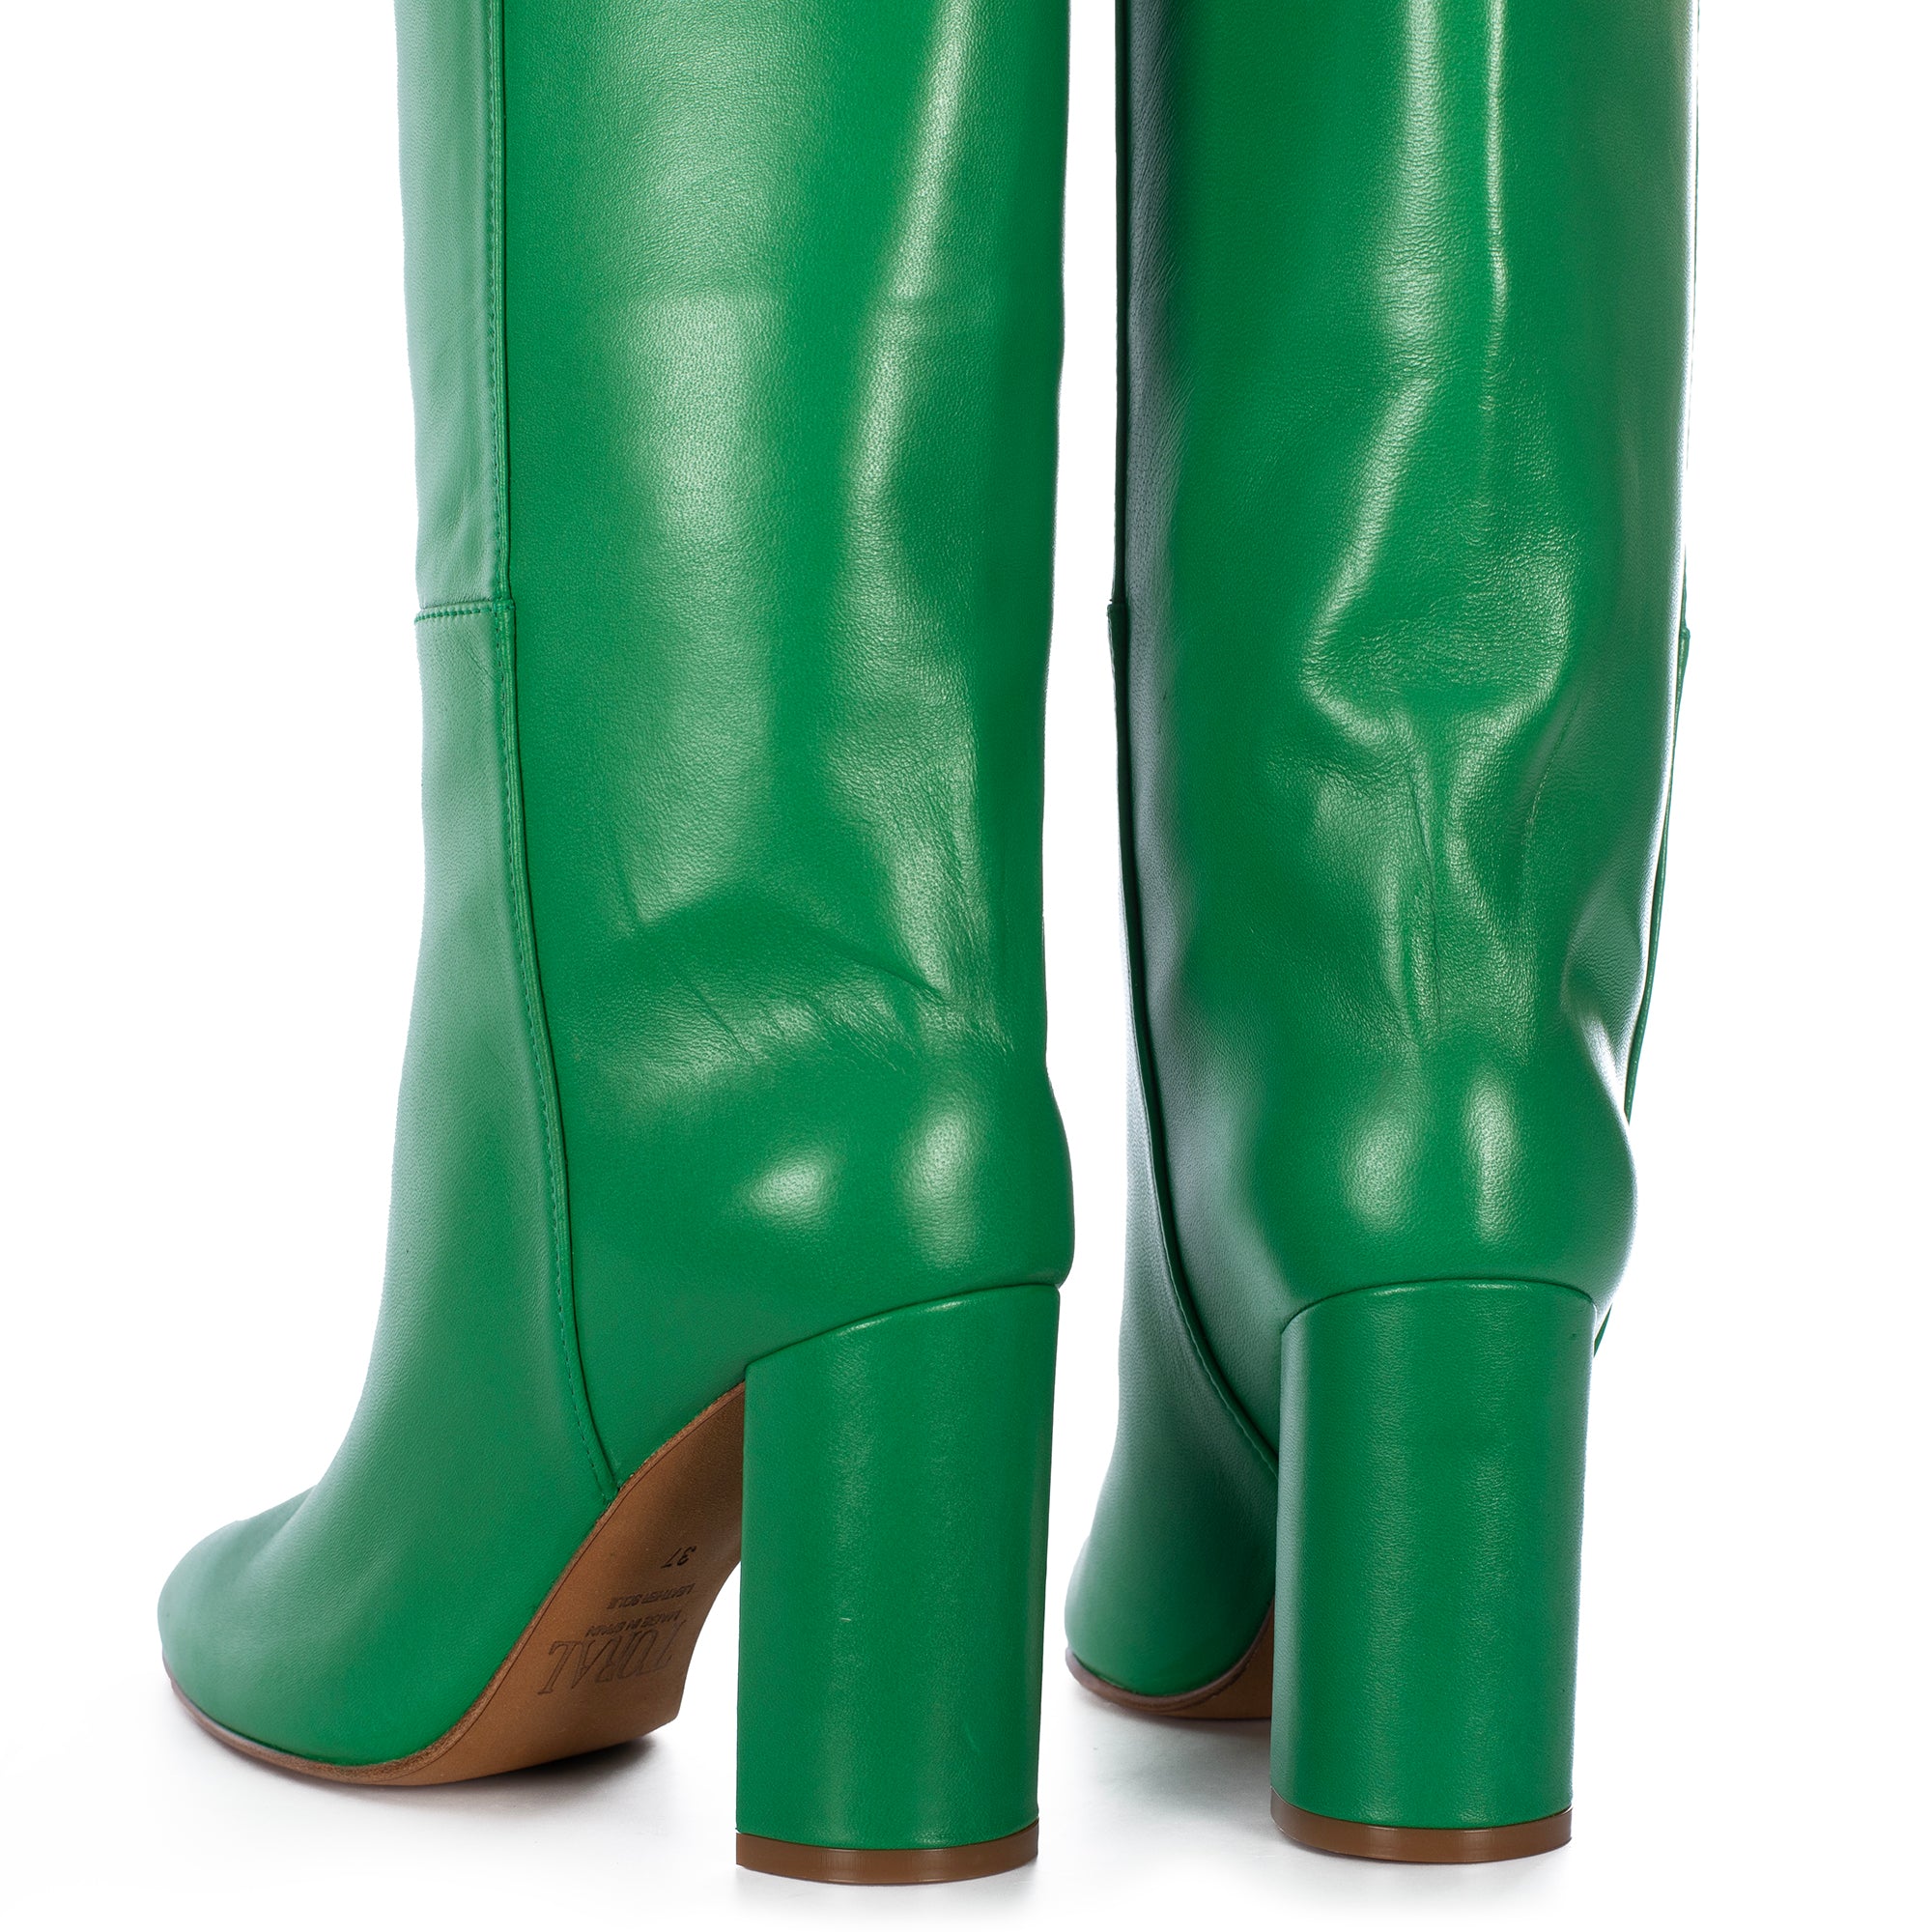 GREEN LEATHER TALL BOOTS